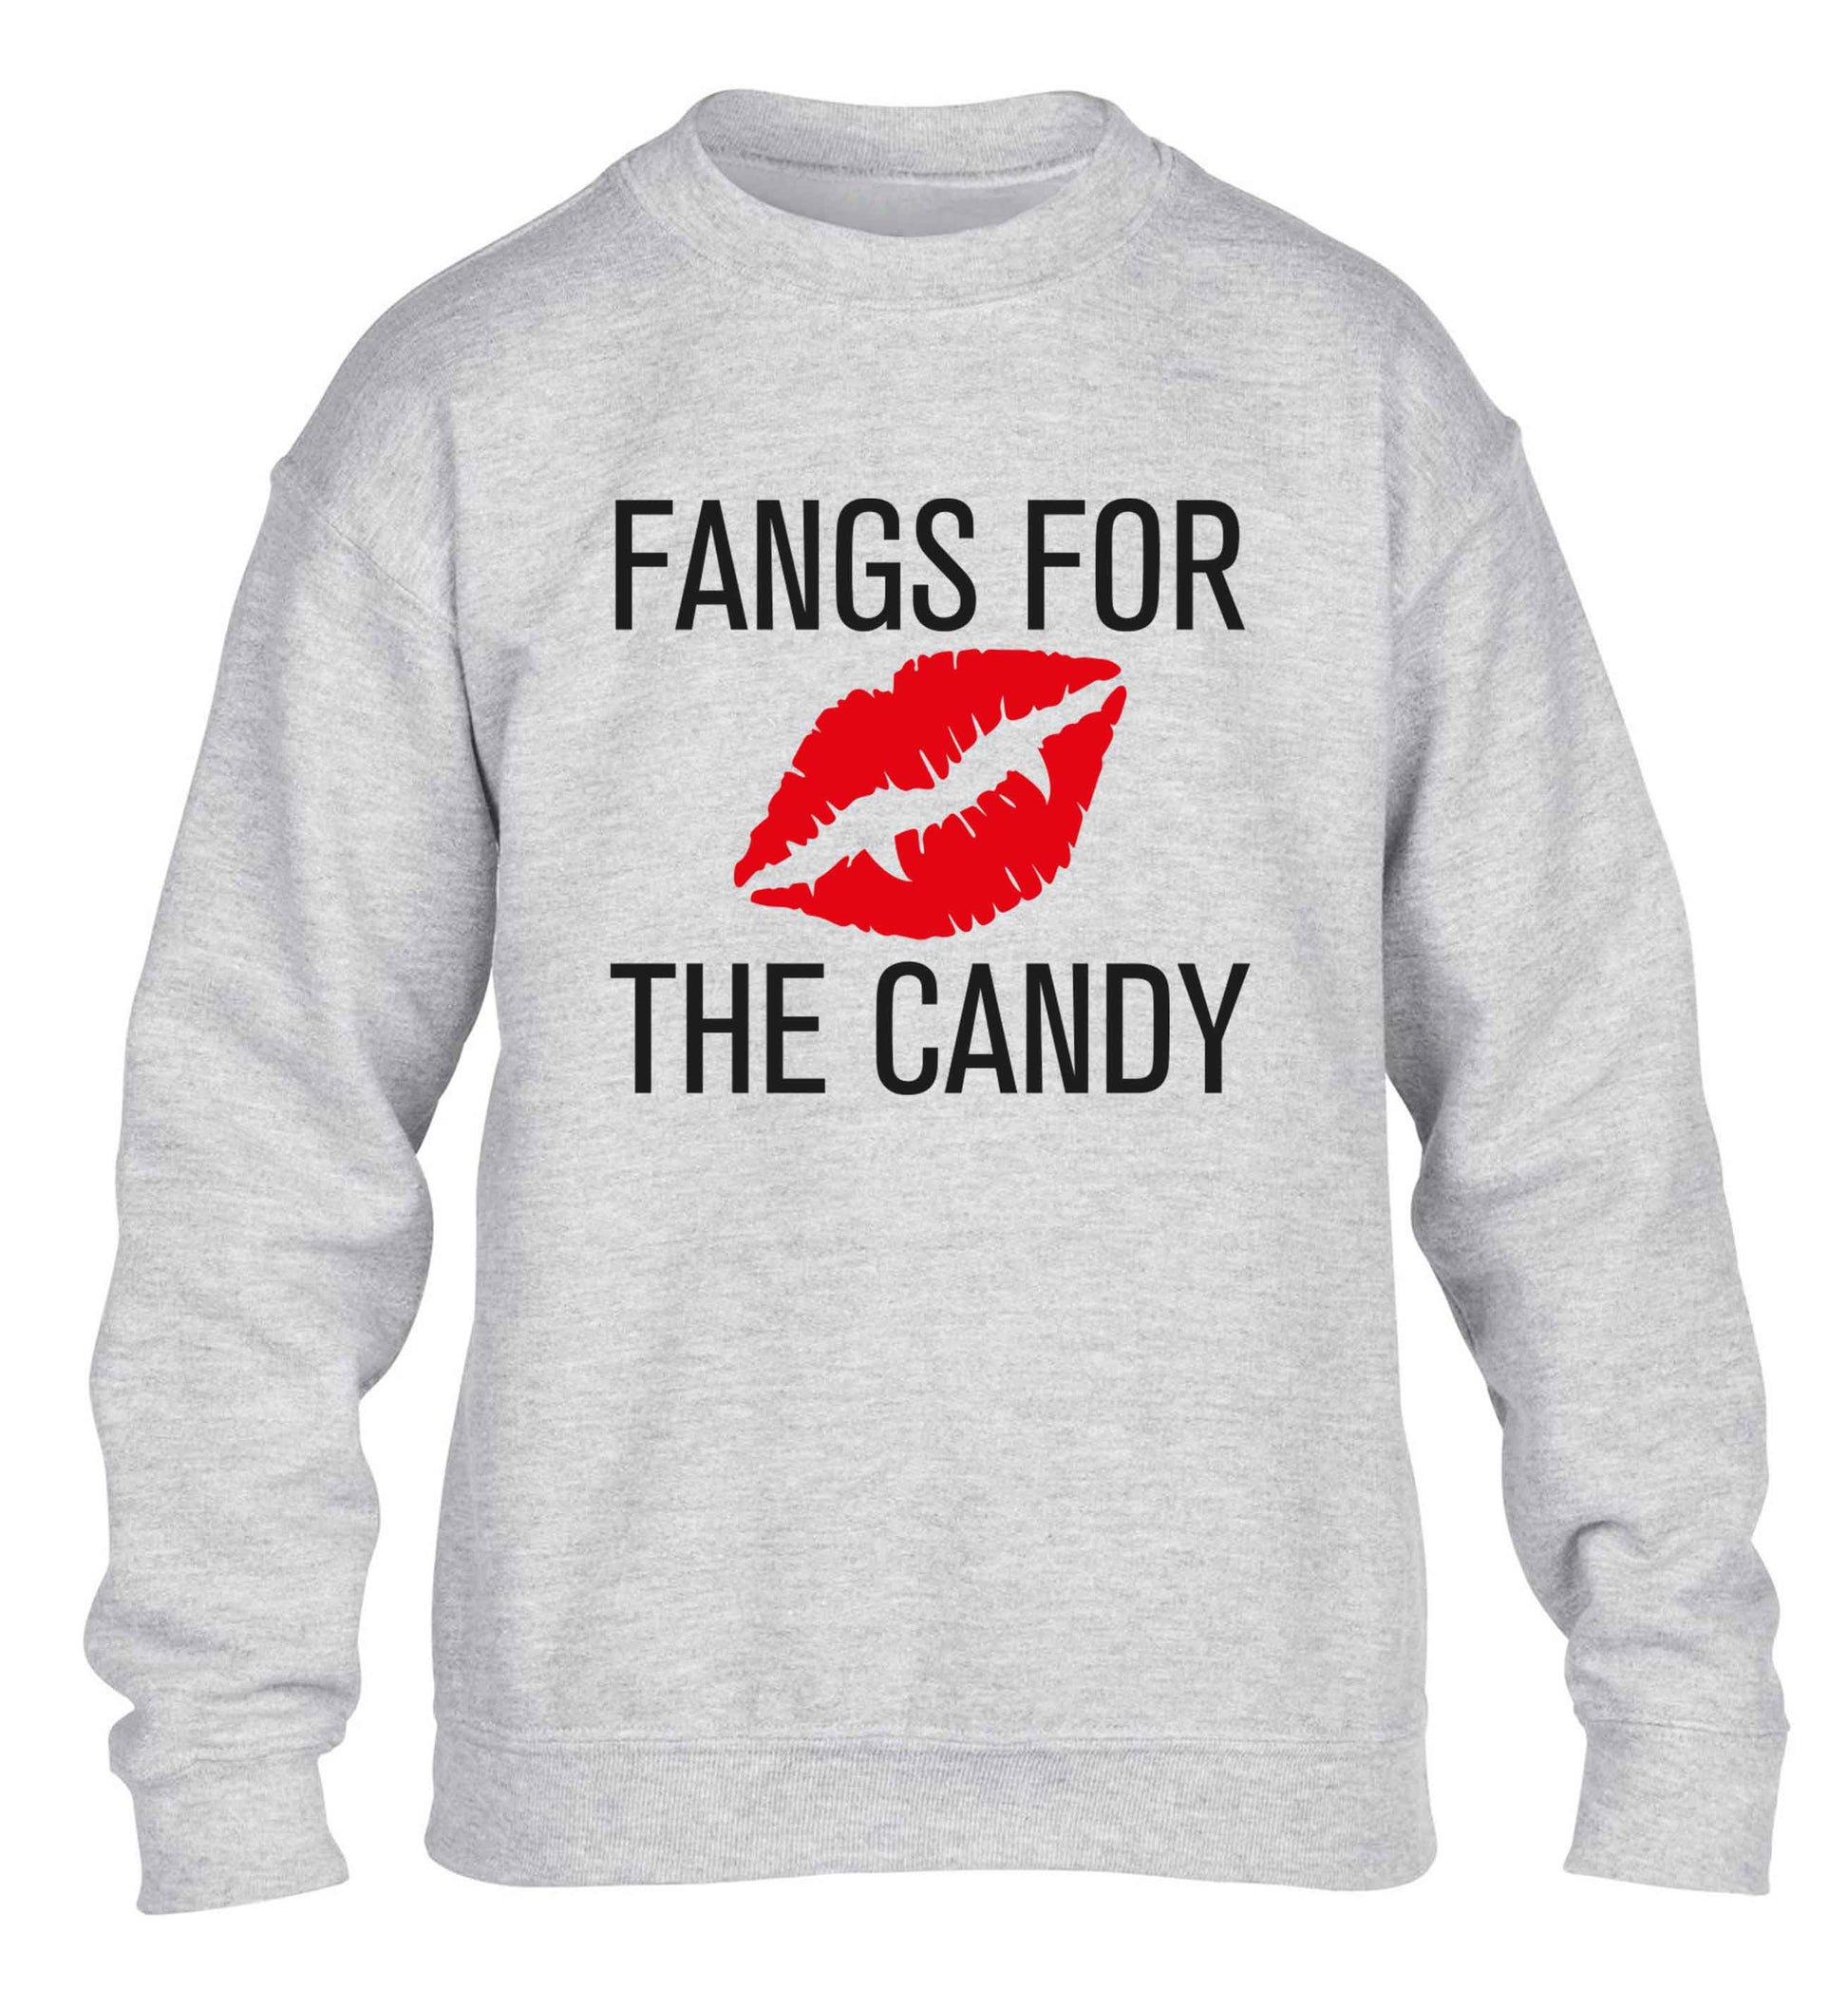 Fangs for the candy children's grey sweater 12-13 Years